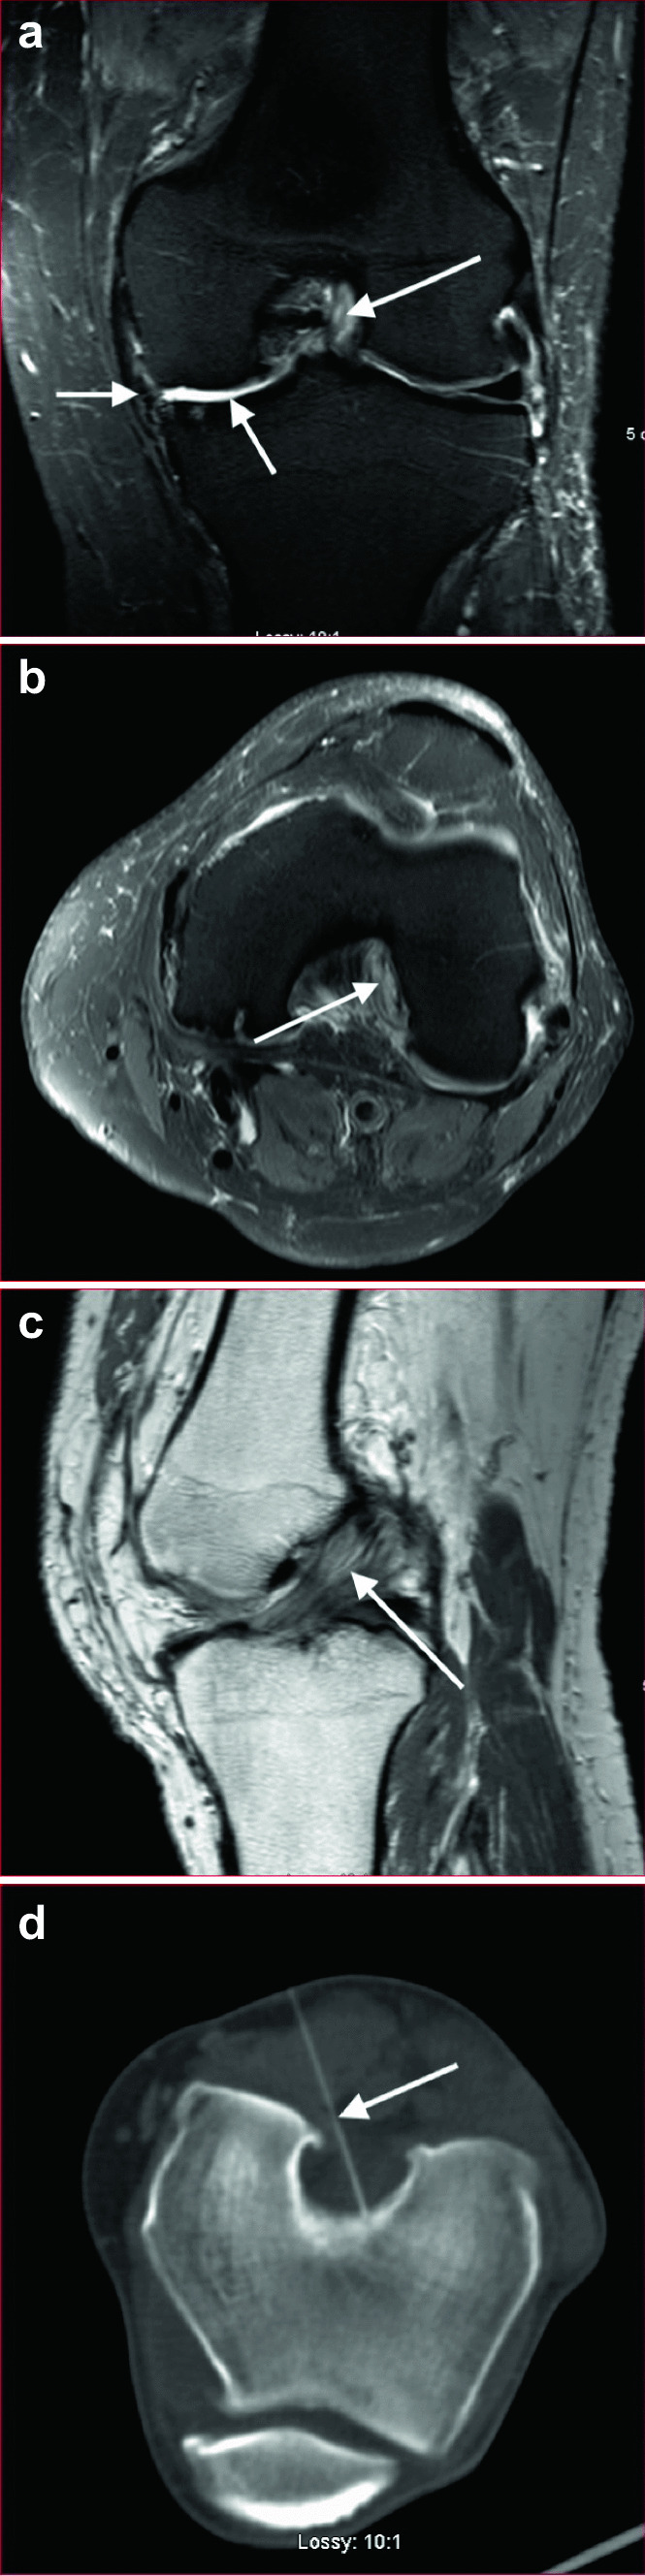 Percutaneous image-guided treatment of mucoid degeneration of the ACL in advanced knee osteoarthritis—Preliminary observations